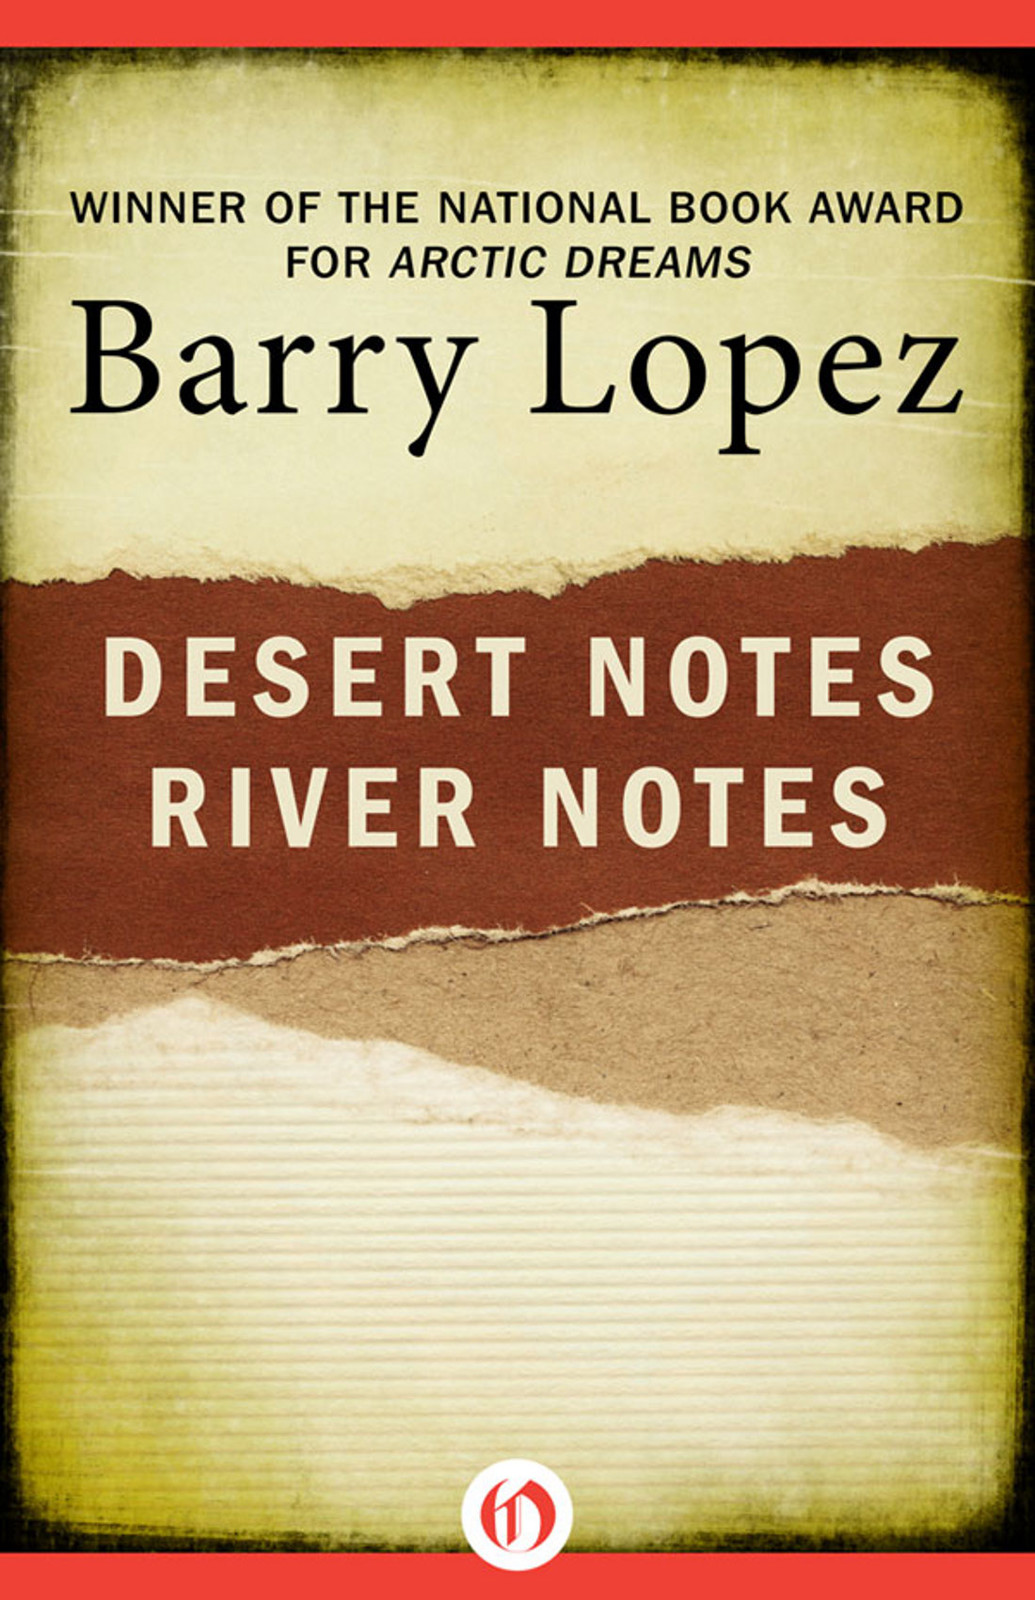 Desert Notes and River Notes Barry Lopez Desert Notes Reflections in the Eye - photo 1